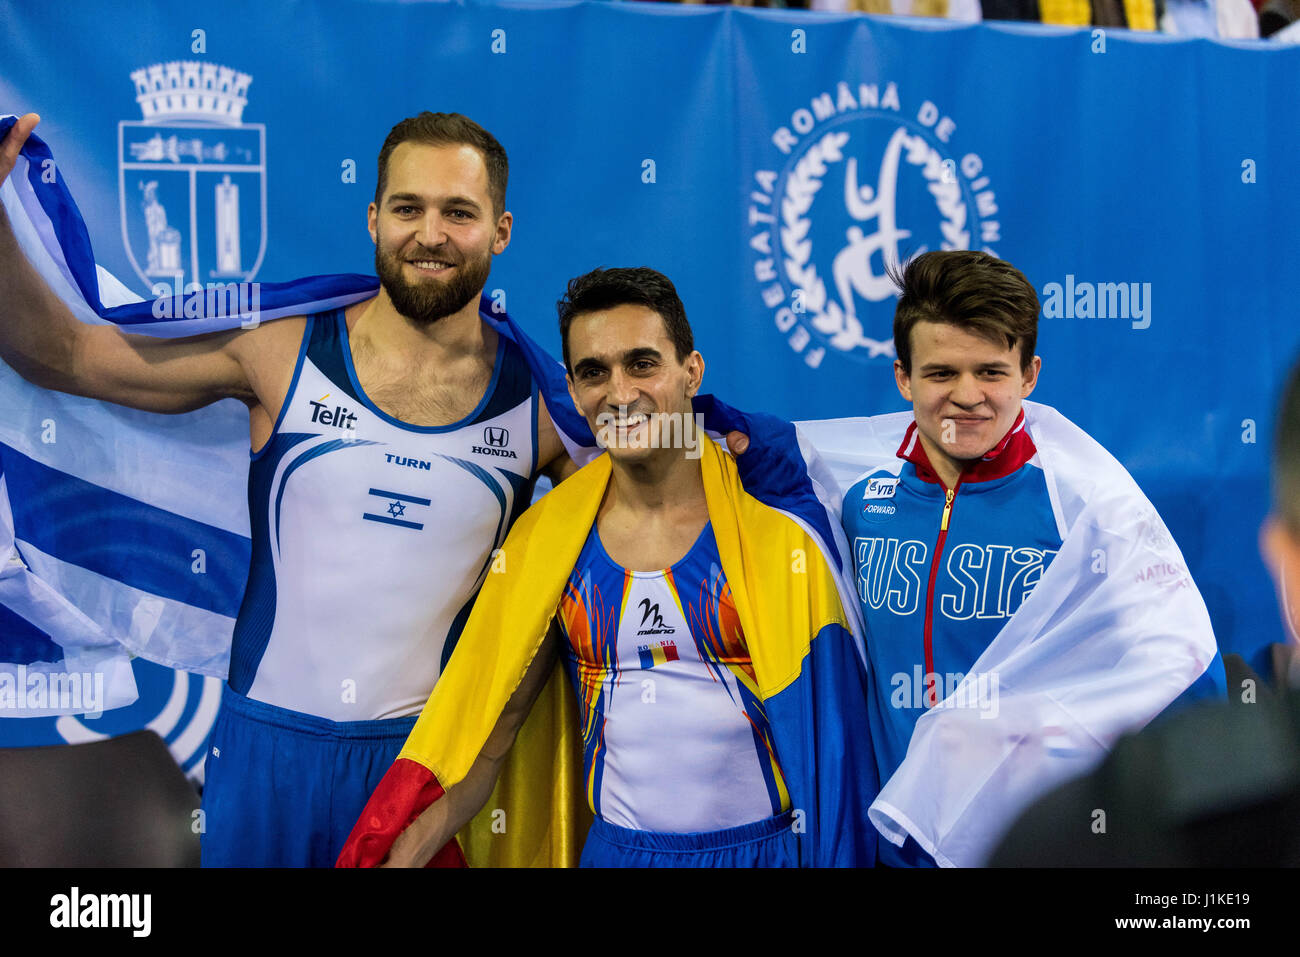 Left to right: Alexander Shatilov (ISR) - bronze medal - and Marian Dragulescu (ROU) - gold medal - and Dmitrii Lankin (RUS) silver medal during the floor Awarding Ceremony Men's Apparatus Finals at the European Men's and Women's Artistic Gymnastics Championships in Cluj Napoca, Romania. 22.04.2017 Photo: Catalin Soare/dpa Stock Photo